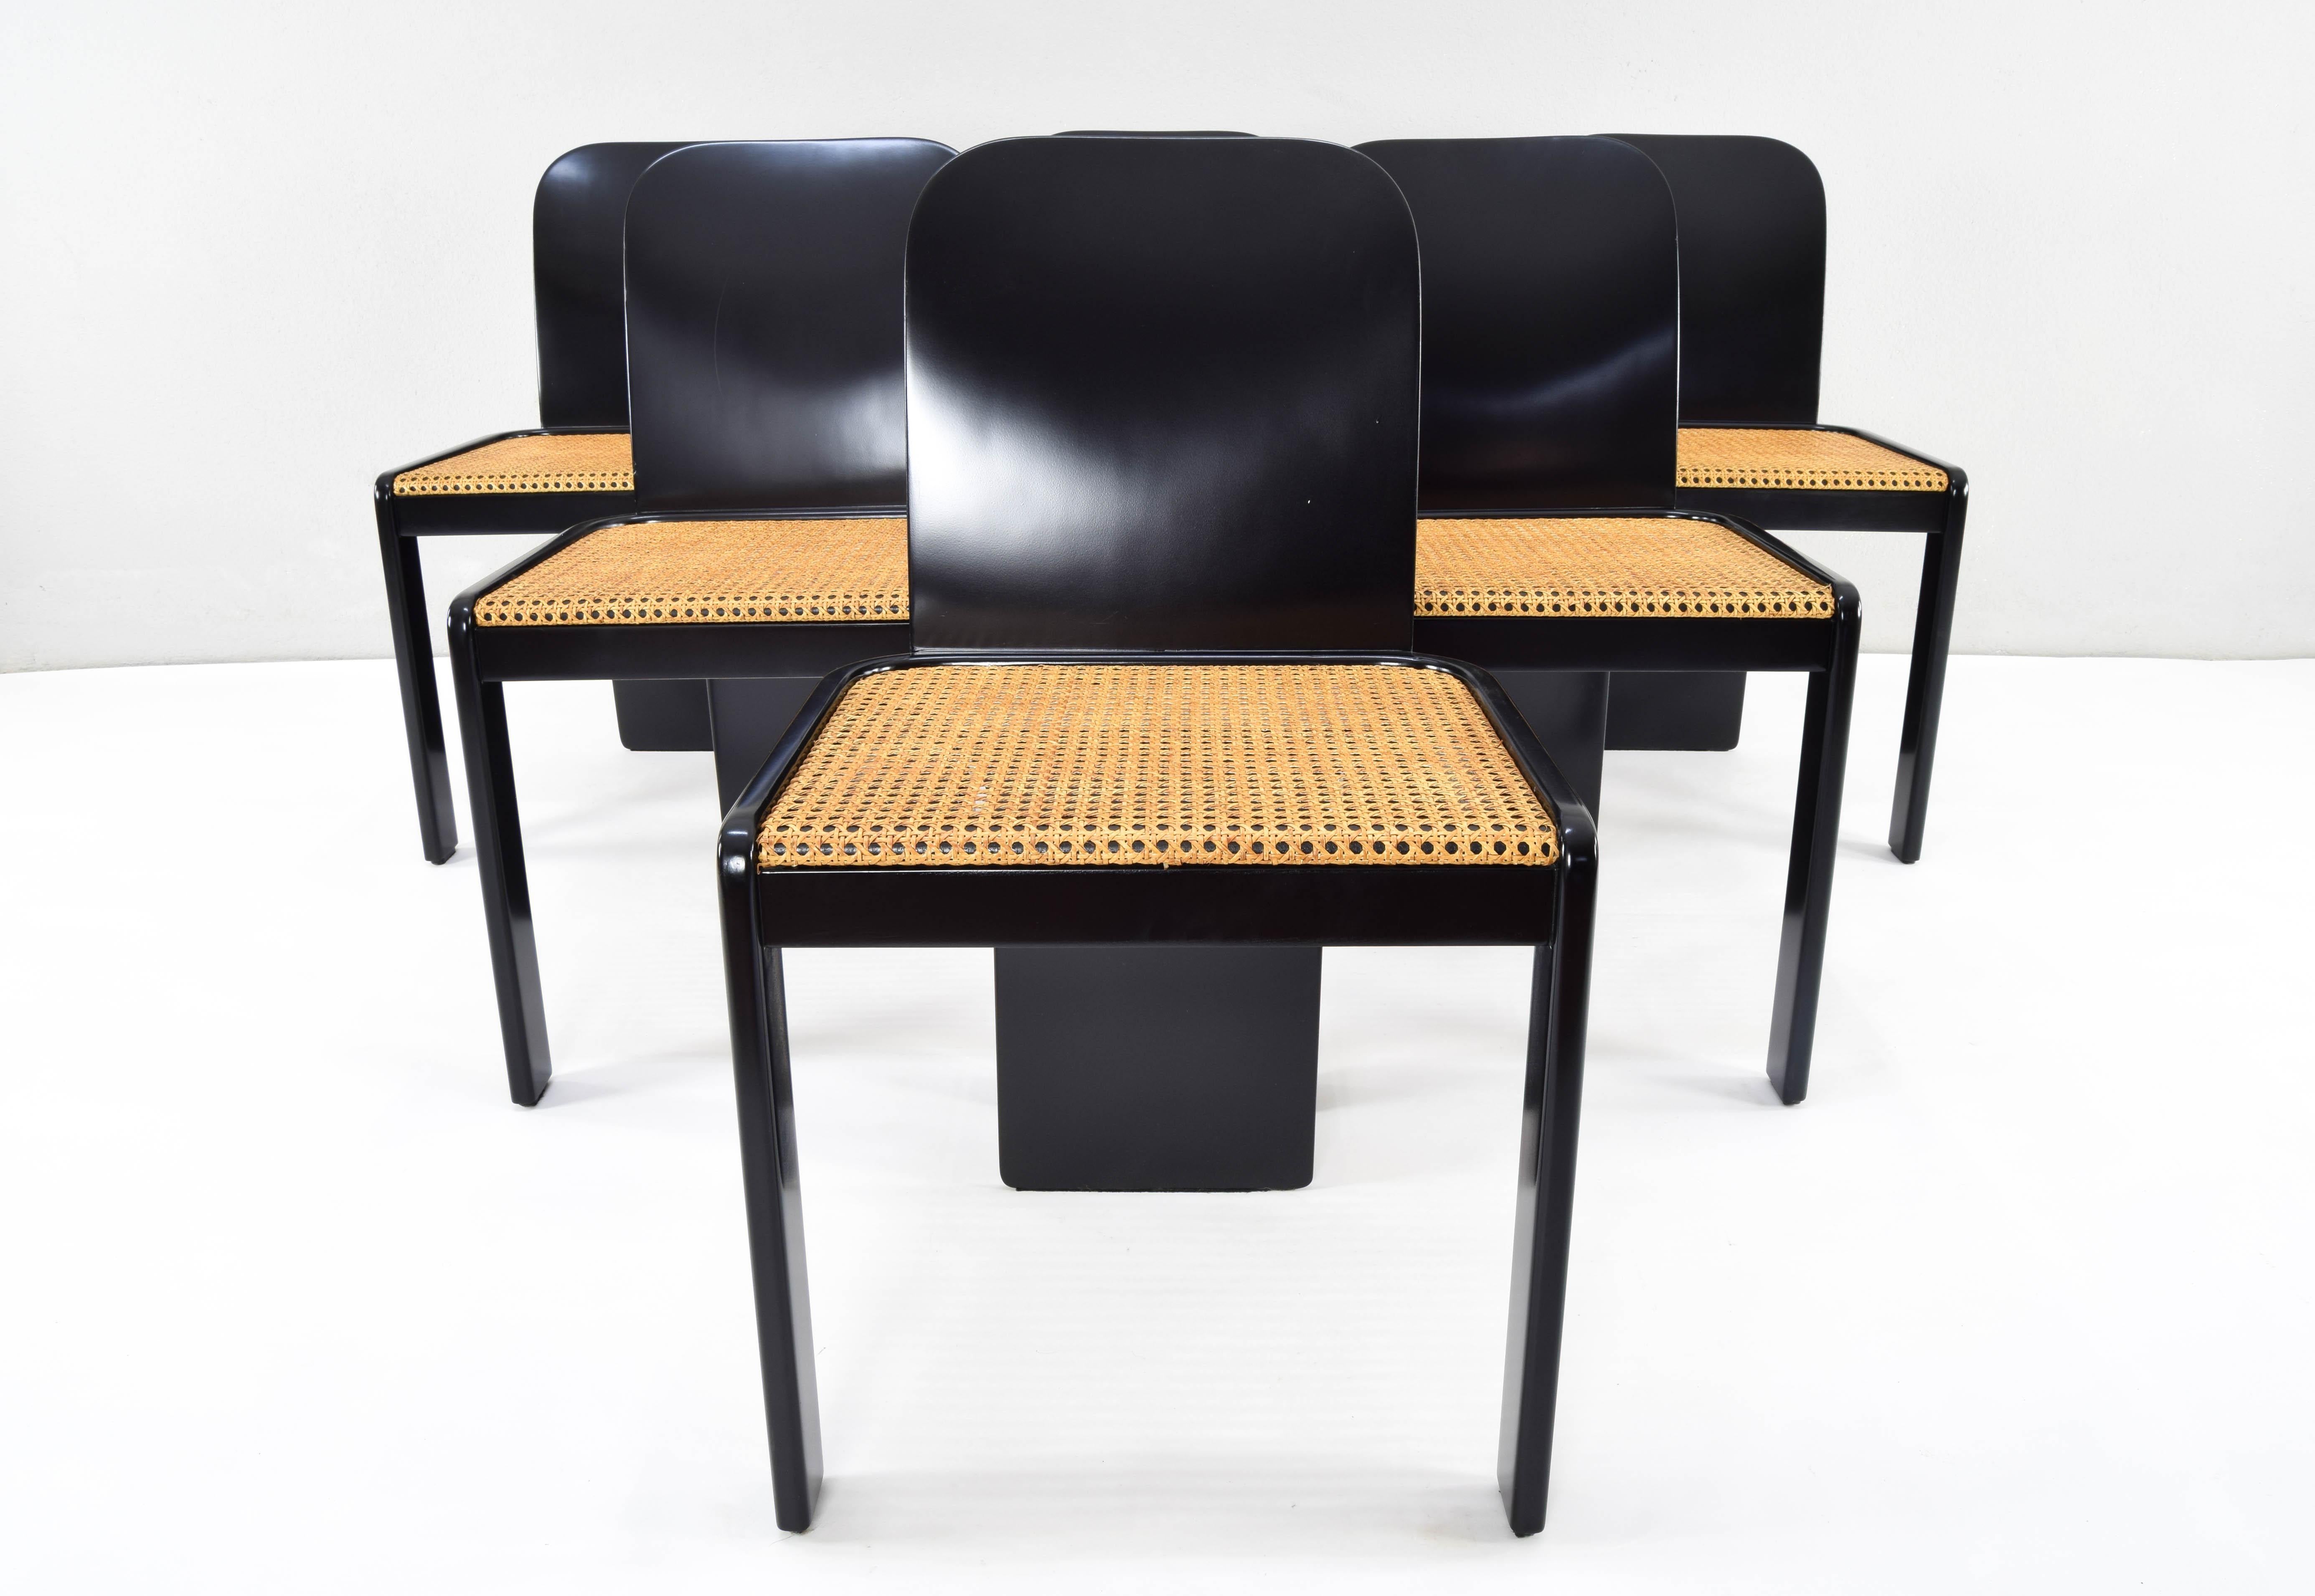 Set of six exquisitely designed dining chairs by Pierluigi Molinari for Pozzi Milano in the 1970s.
Black lacquered wooden structure with back in steam curved wood with chrome steel detail. Natural Viennese mesh seats. The seat grilles have been